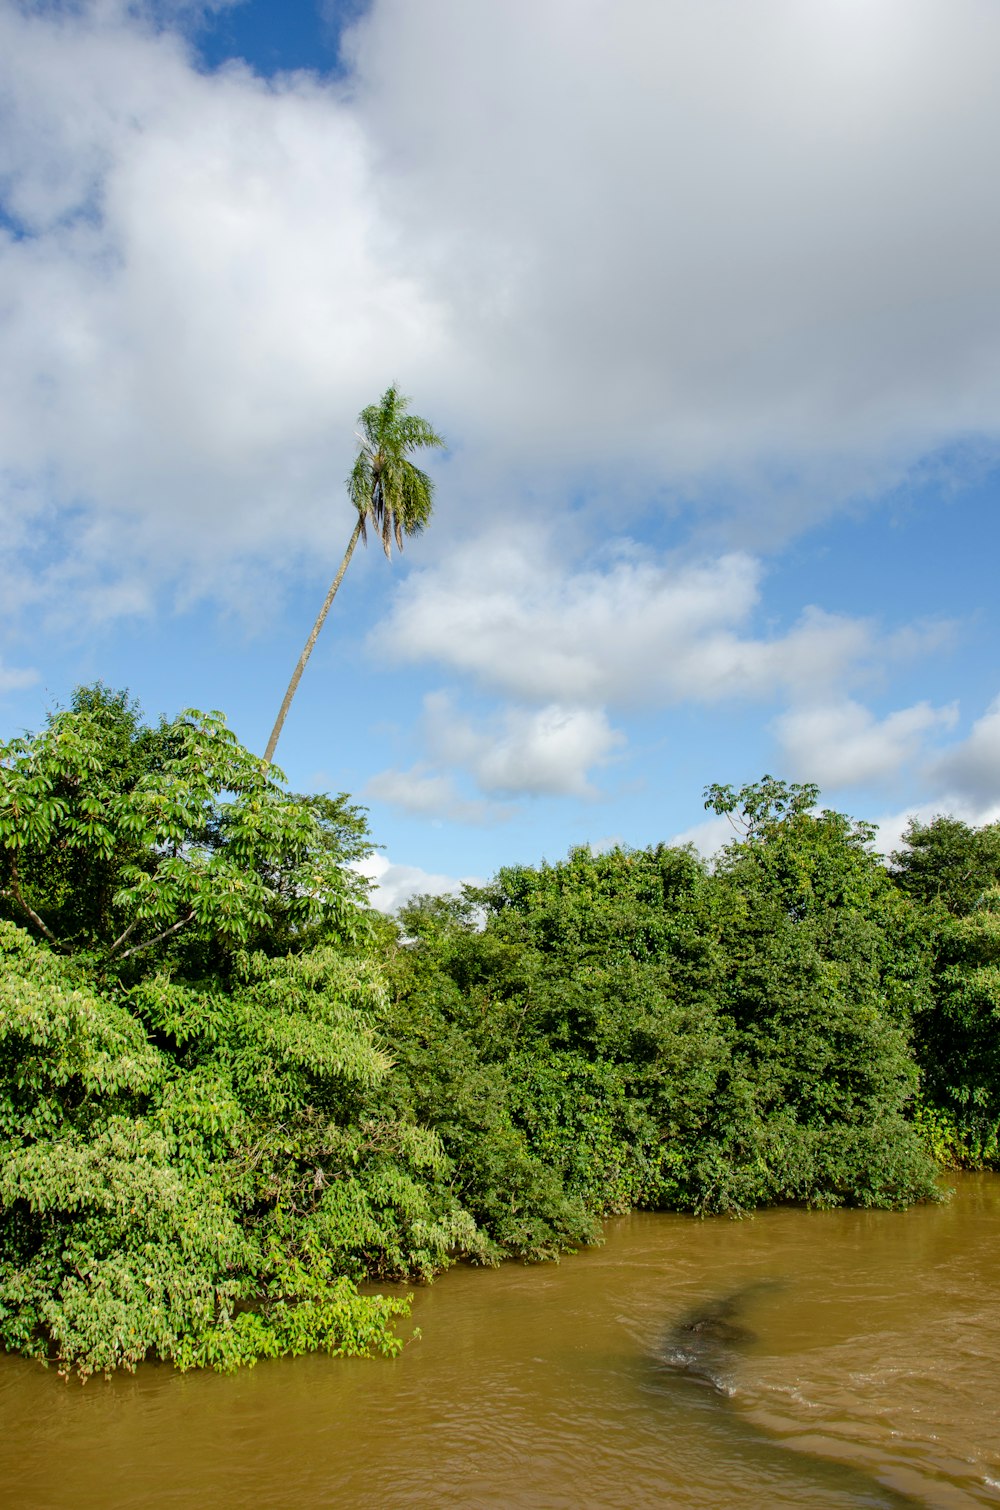 a river with trees and a tall thin tree on the branch